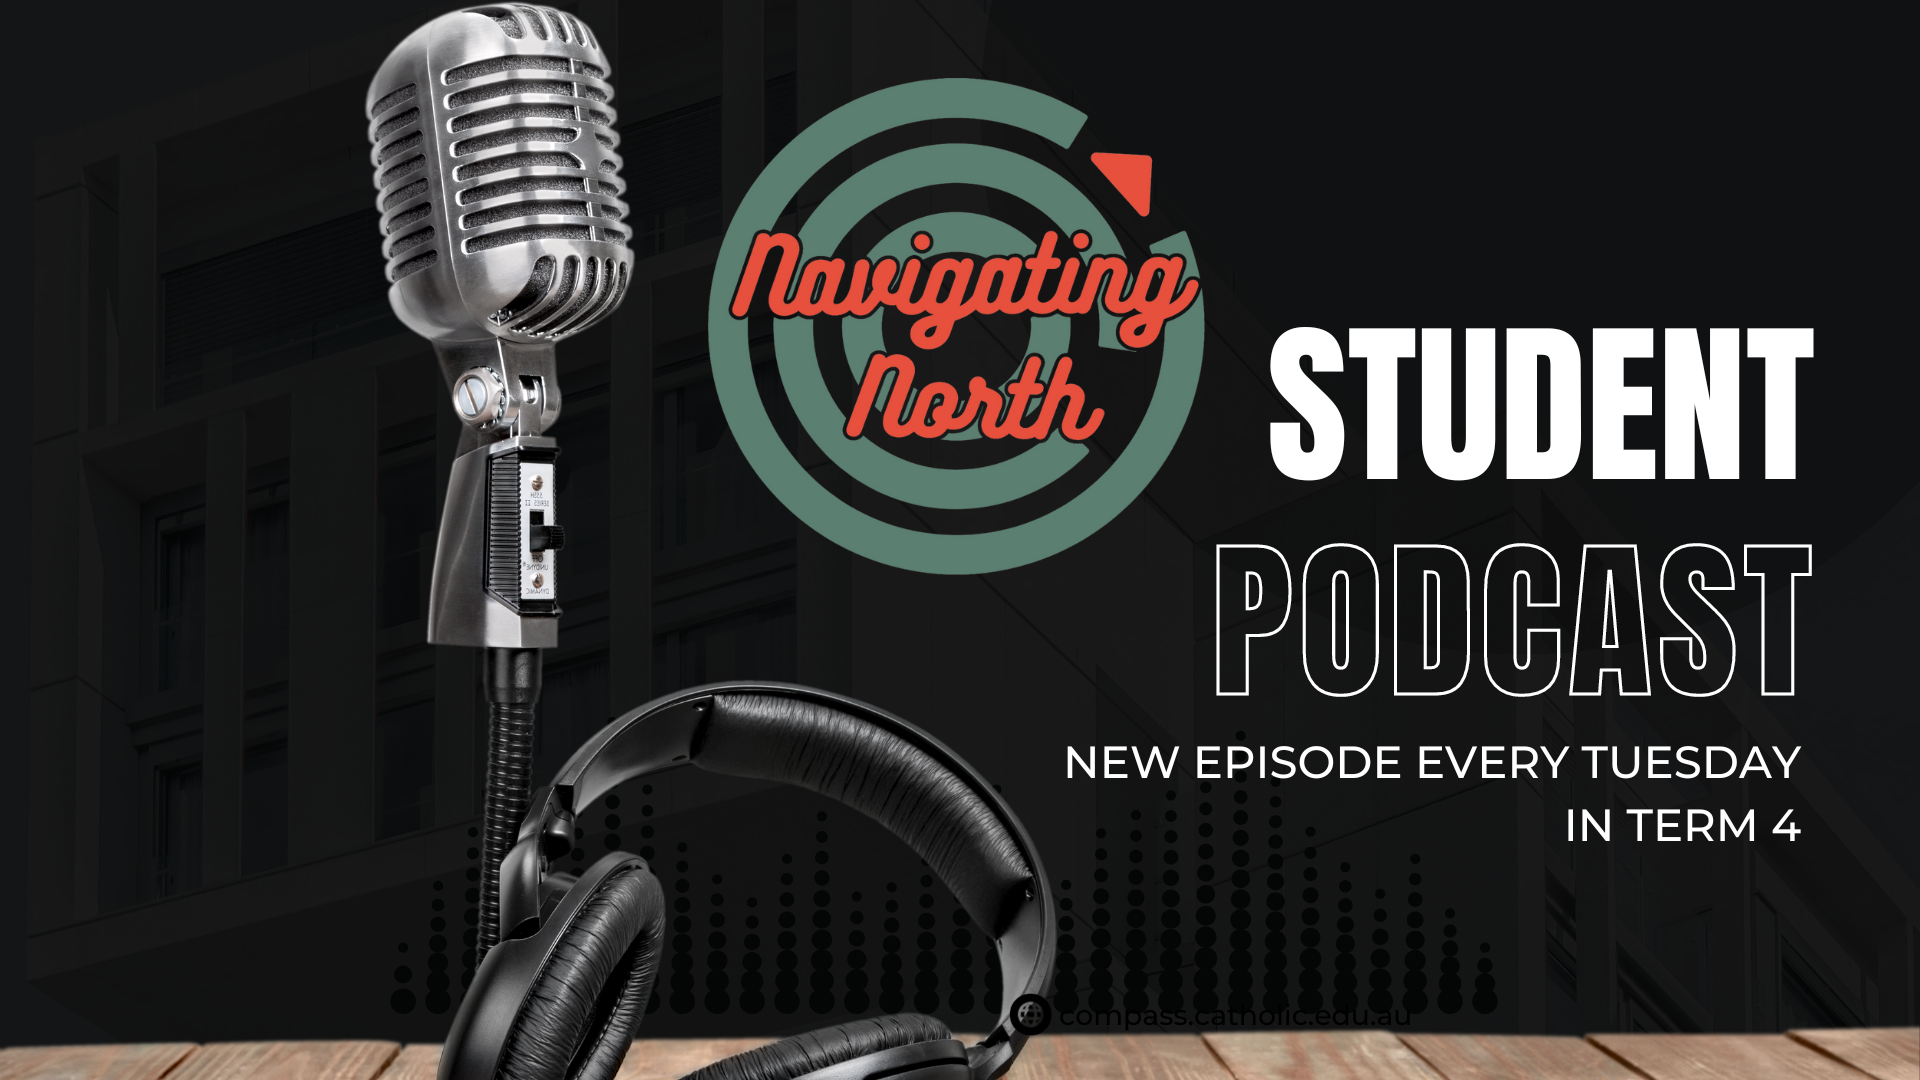 Compass Launches Student Podcast!